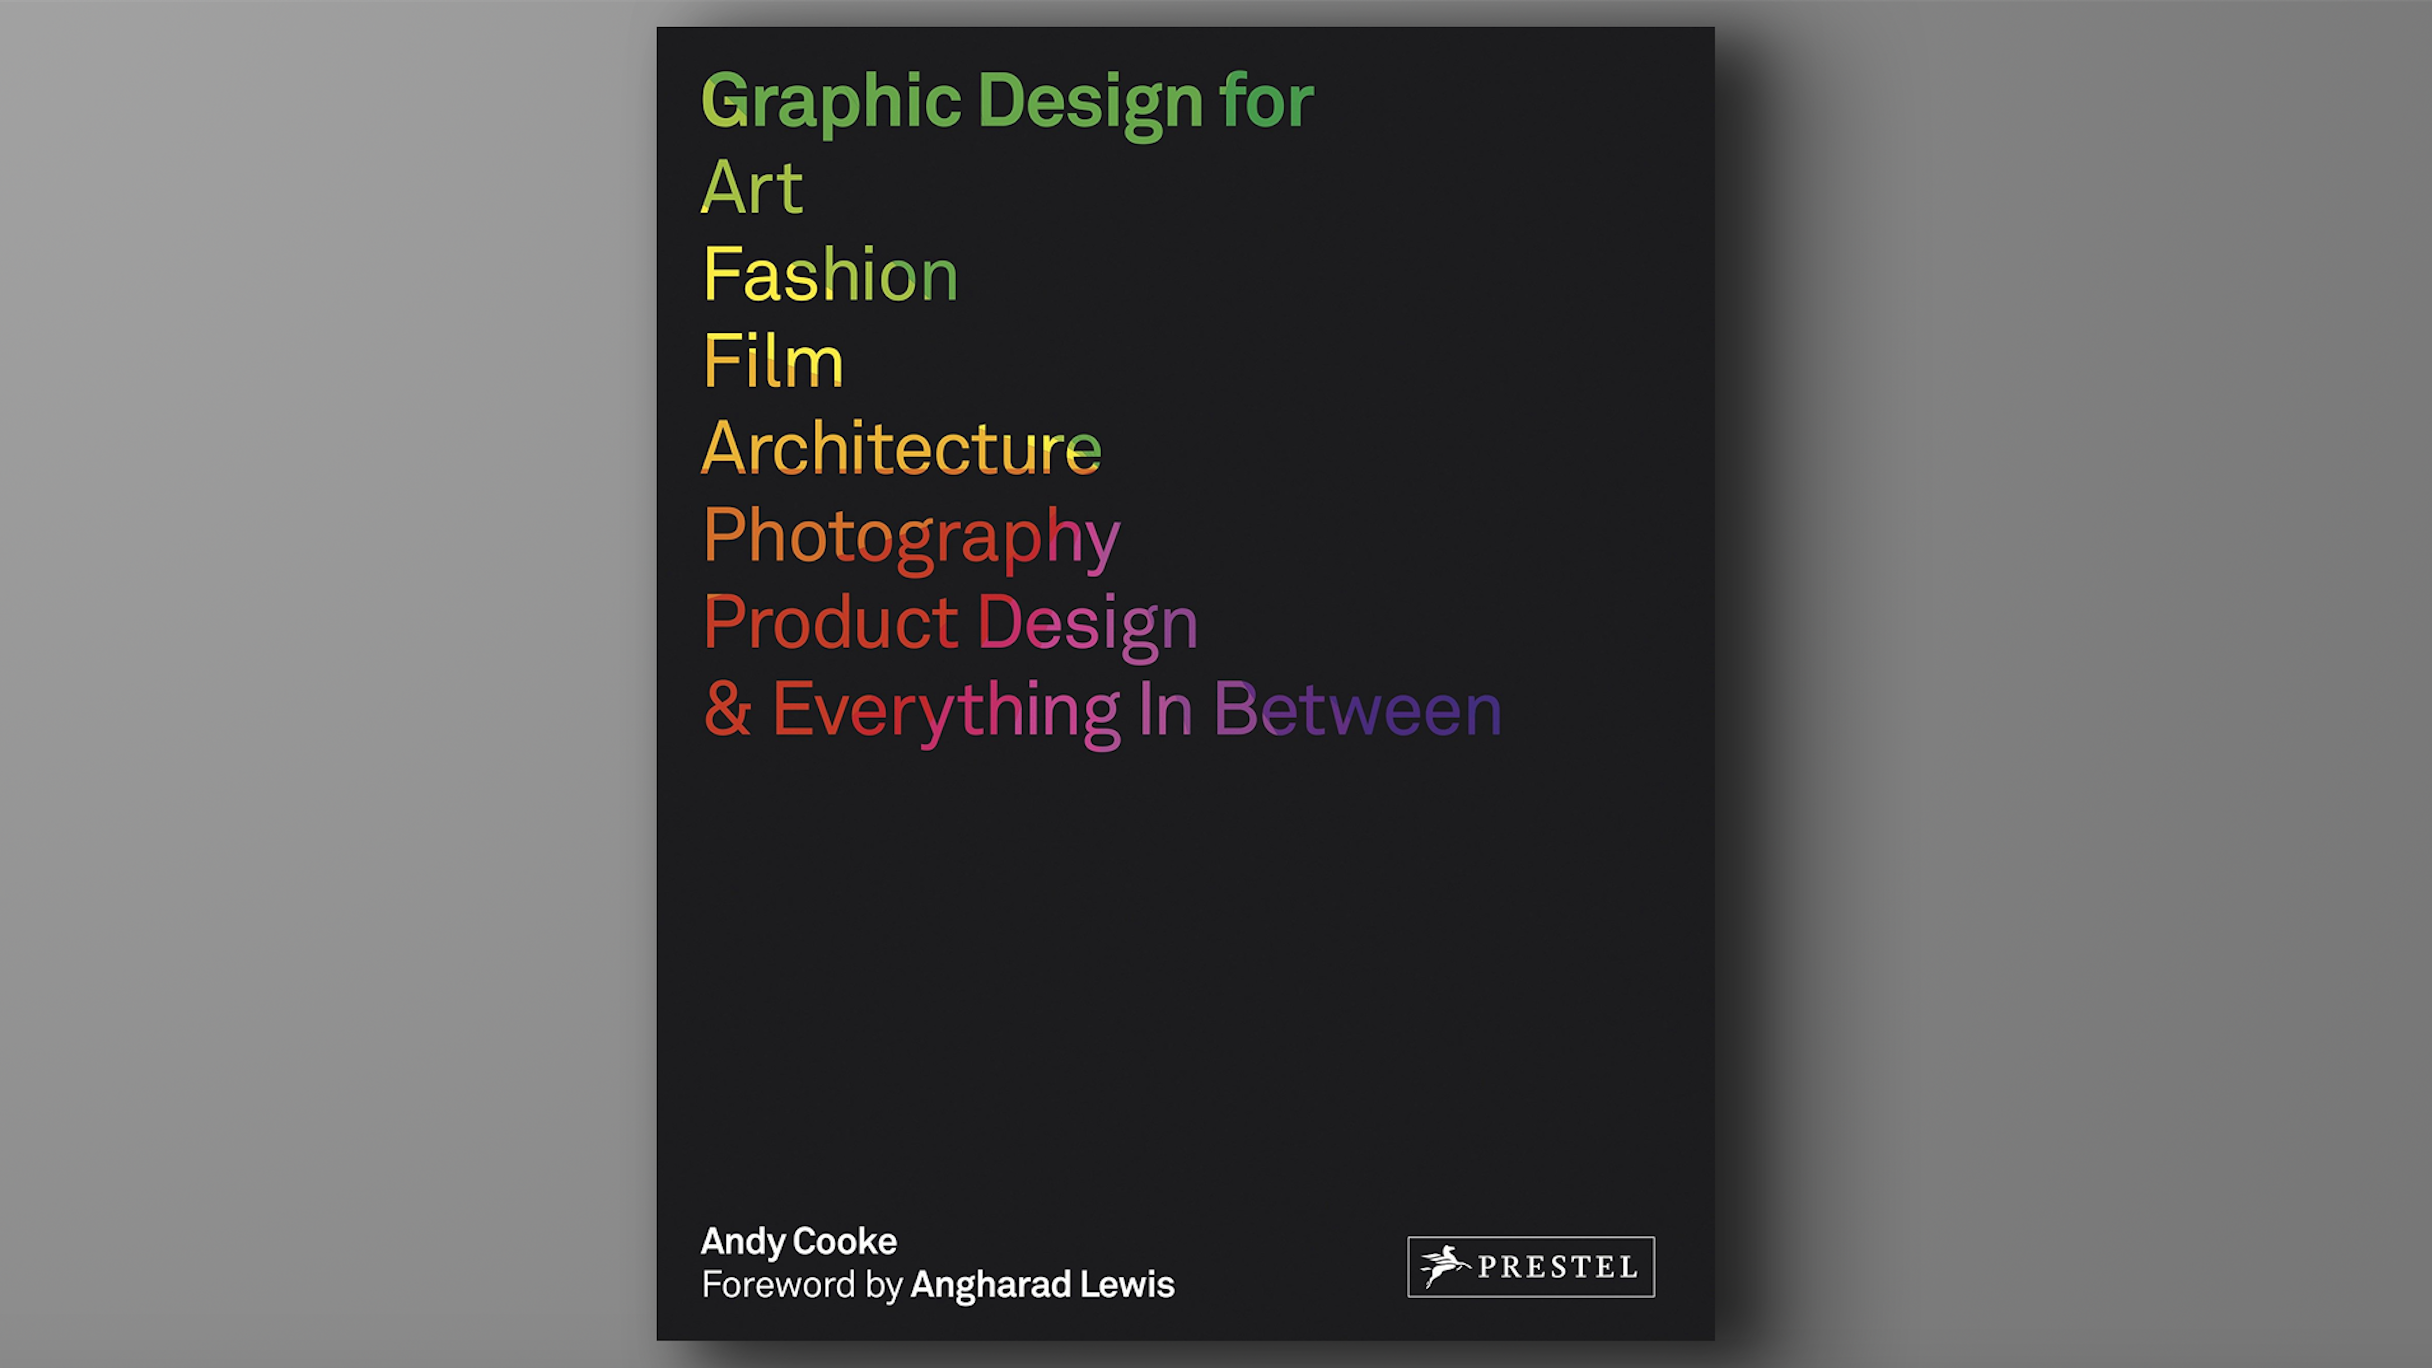 Cover shot of one of the best graphic design books, Graphic Design for Art, Fashion, Film, Architecture, Photography, Product Design & Everything In Between